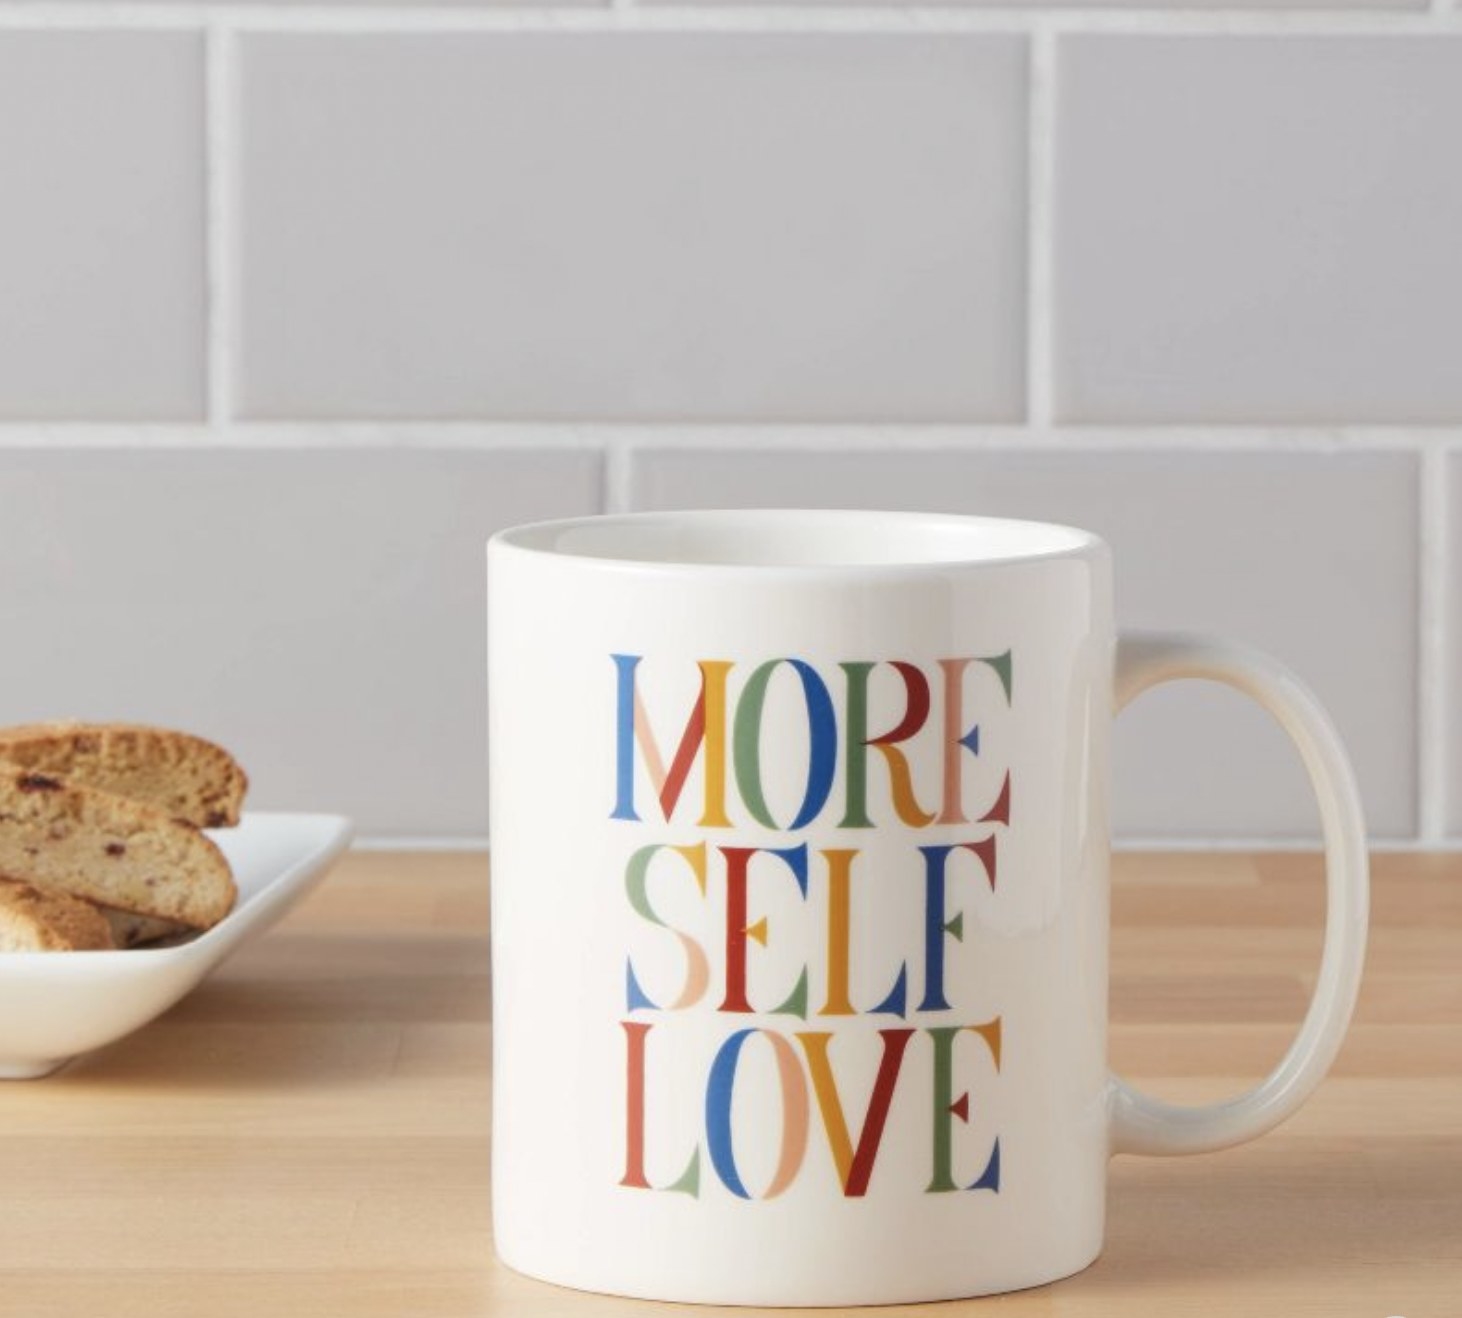 The mug with More Self Love in colored letters